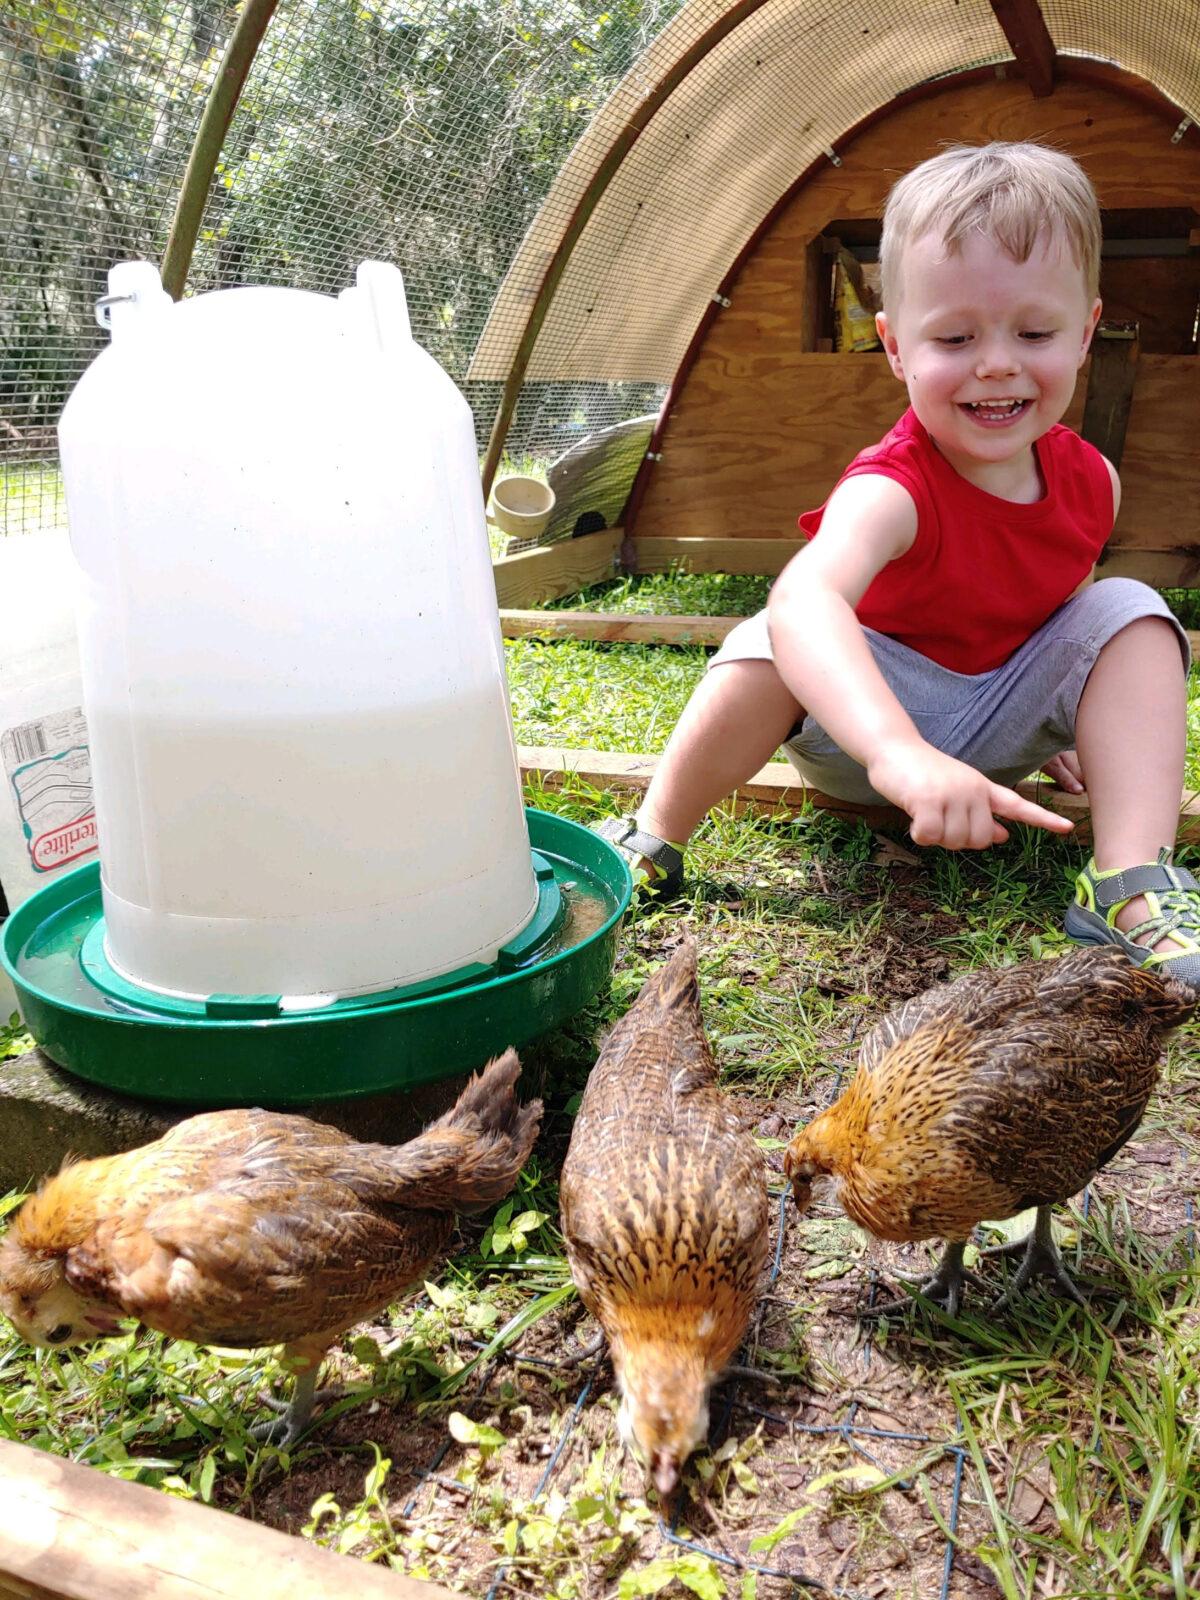 Meredith Meeks' son plays with their chickens inside the spacious, mobile chicken coop. (Courtesy of Meredith Meeks)